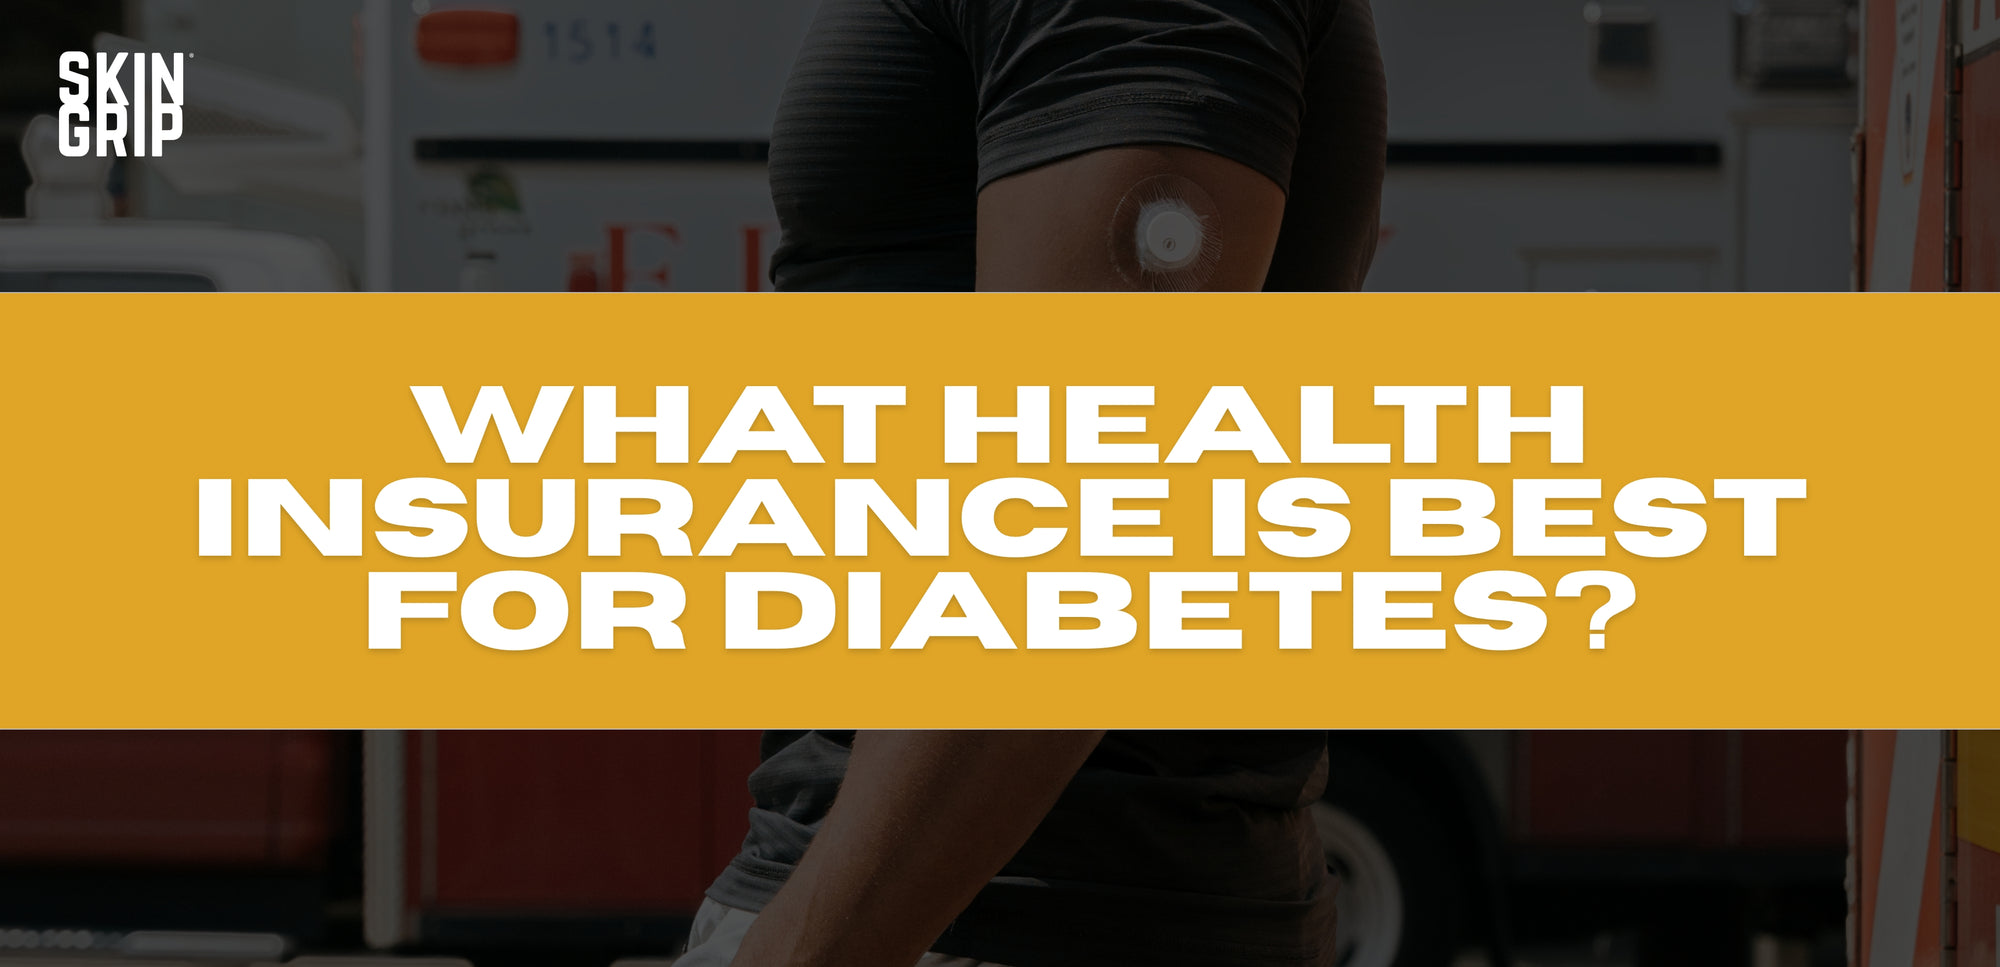 What Health Insurance is Best for Diabetes?: Questions to Ask During Open Enrollment